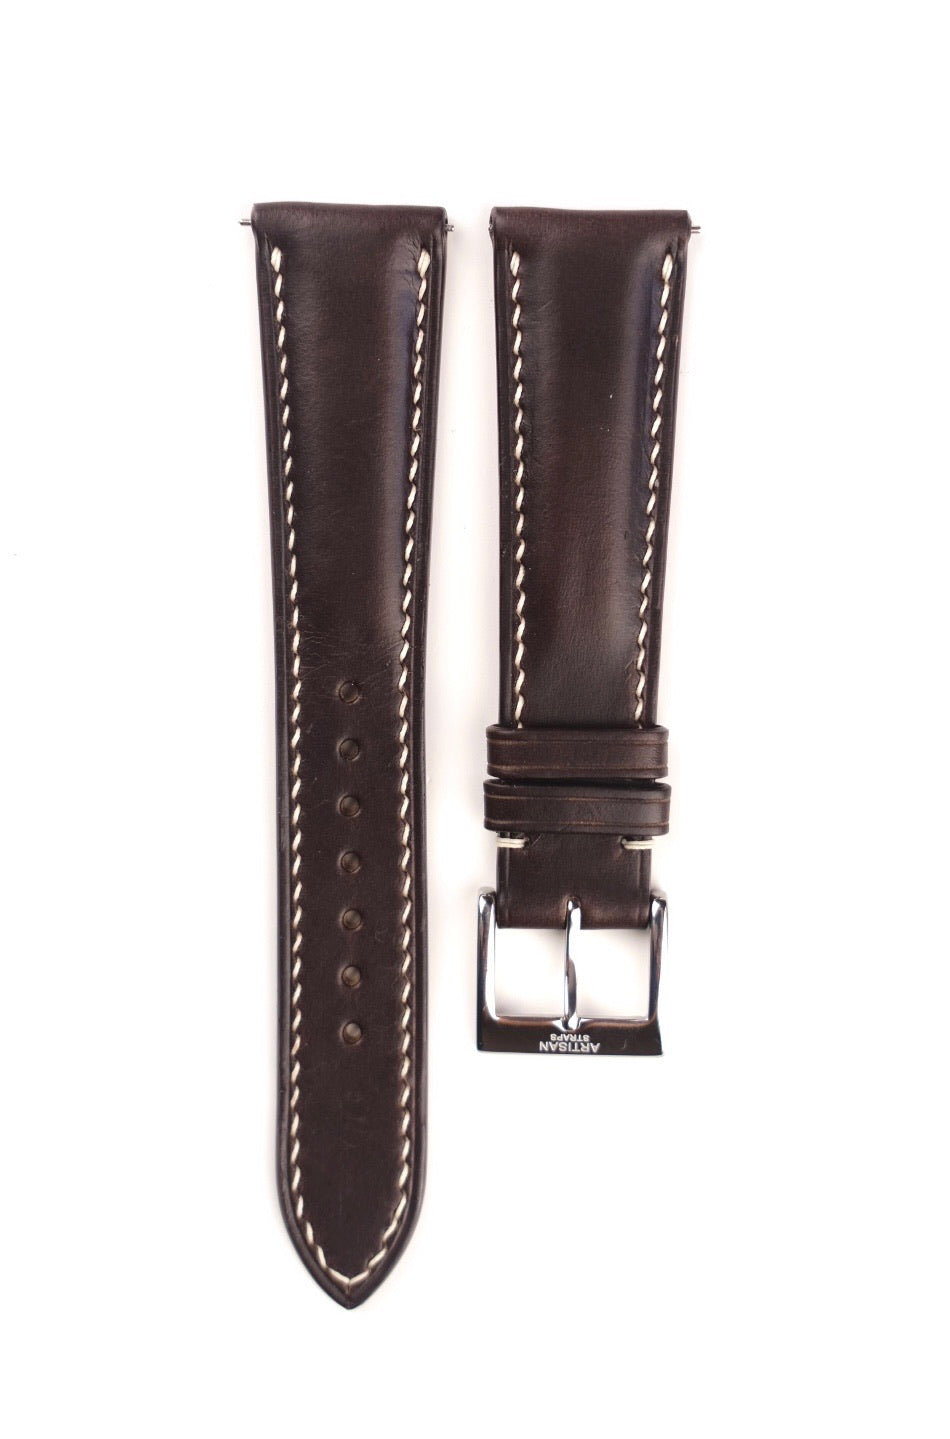 Horween Chromexcel Padded Leather Strap in Dark Brown (Ready-to-Wear) - Artisan Straps